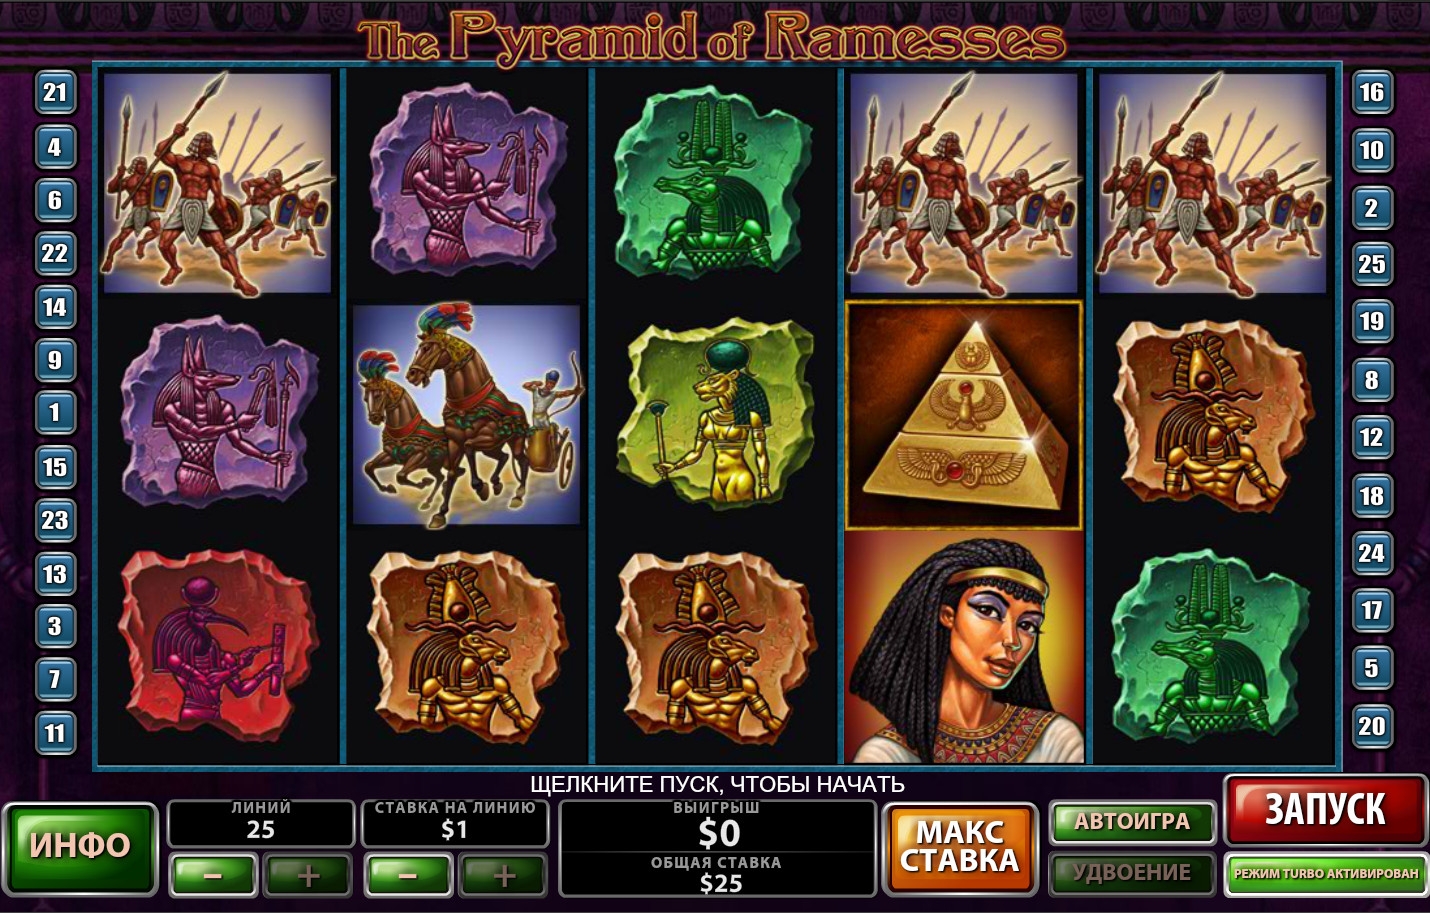 The Pyramid of Ramesses (The Pyramid of Ramesses) from category Slots